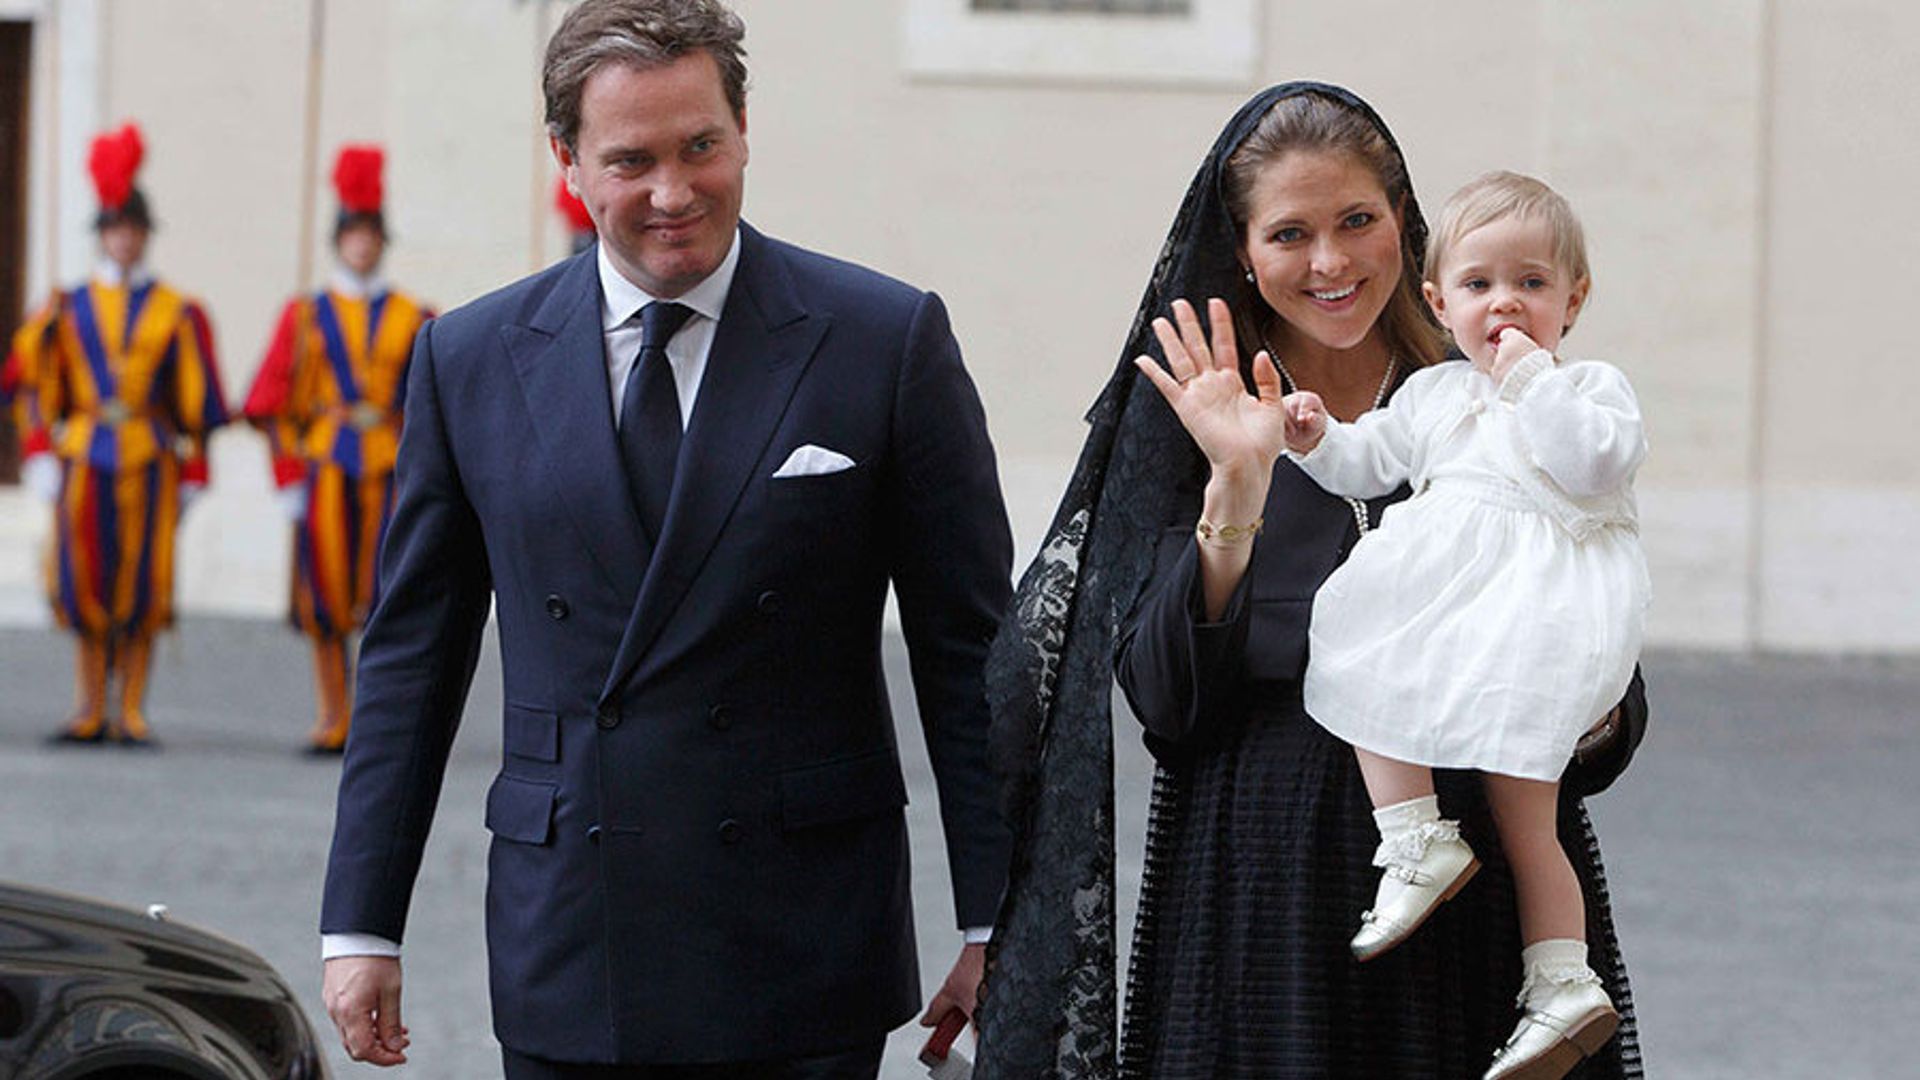 Princess Madeleine of Sweden takes daughter Leonore to meet the Pope